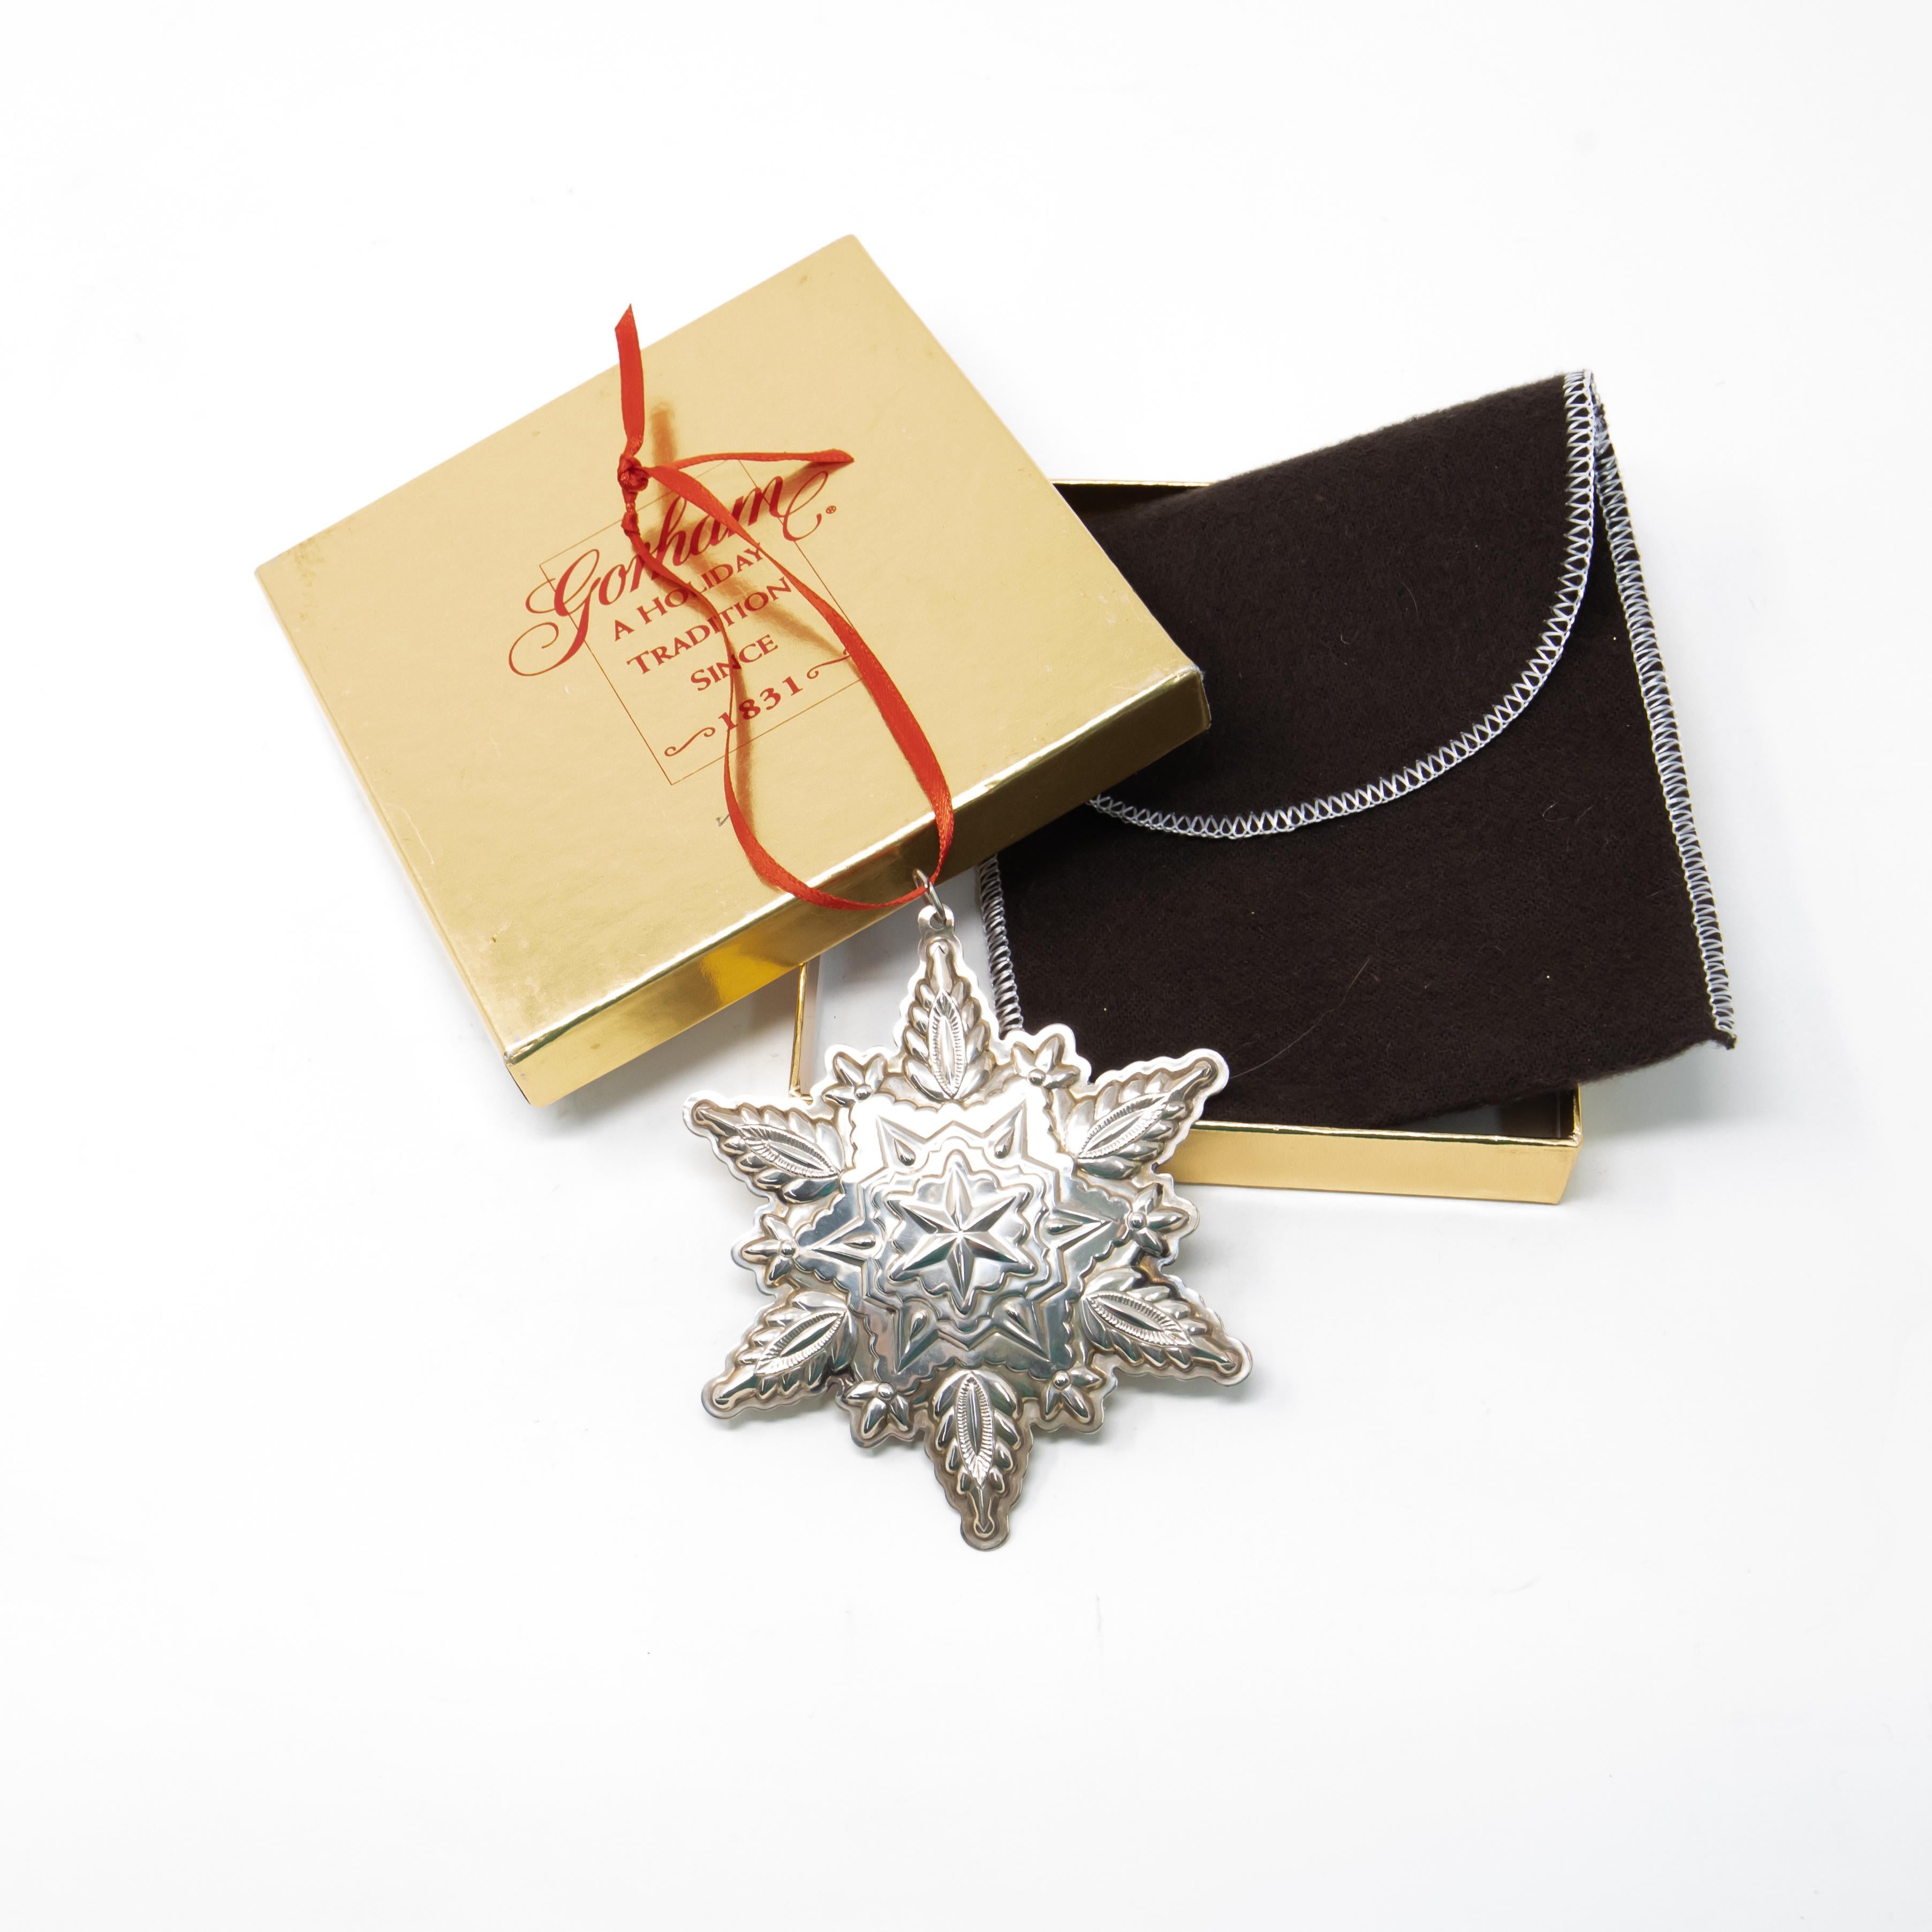 Offering a beautiful Gorham Sterling snowflake from 1999. Starting in the center with a 6 point star goes outward with many geometric patterns. Back is inscribed with Gorham Sterling, trademarks, Christmas, 1999.